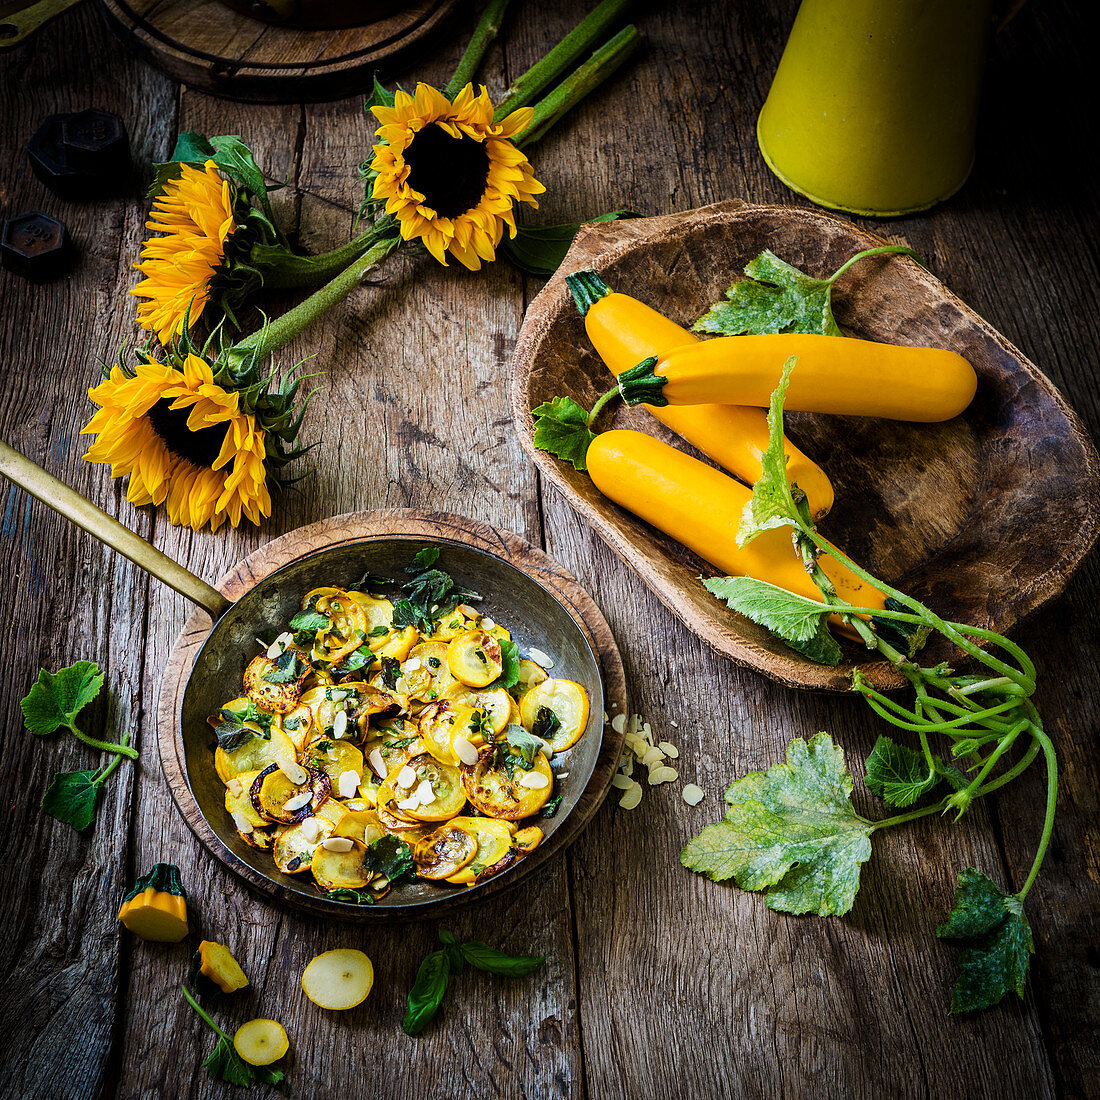 Pan fried courgettes with herbs and sliced almonds with sunflowers